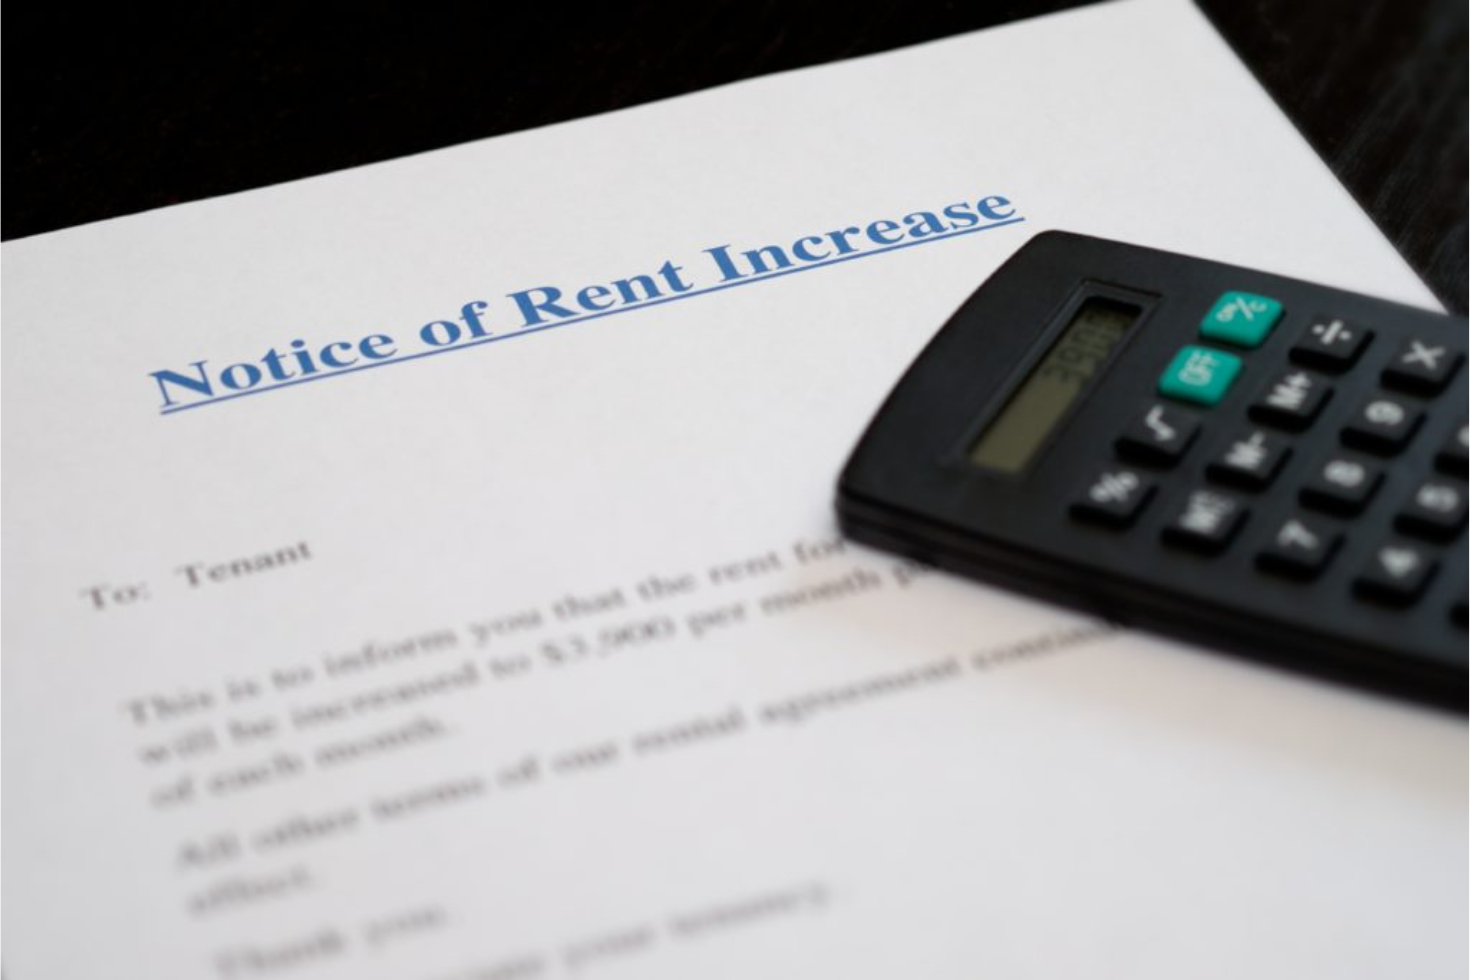 rent increase letter